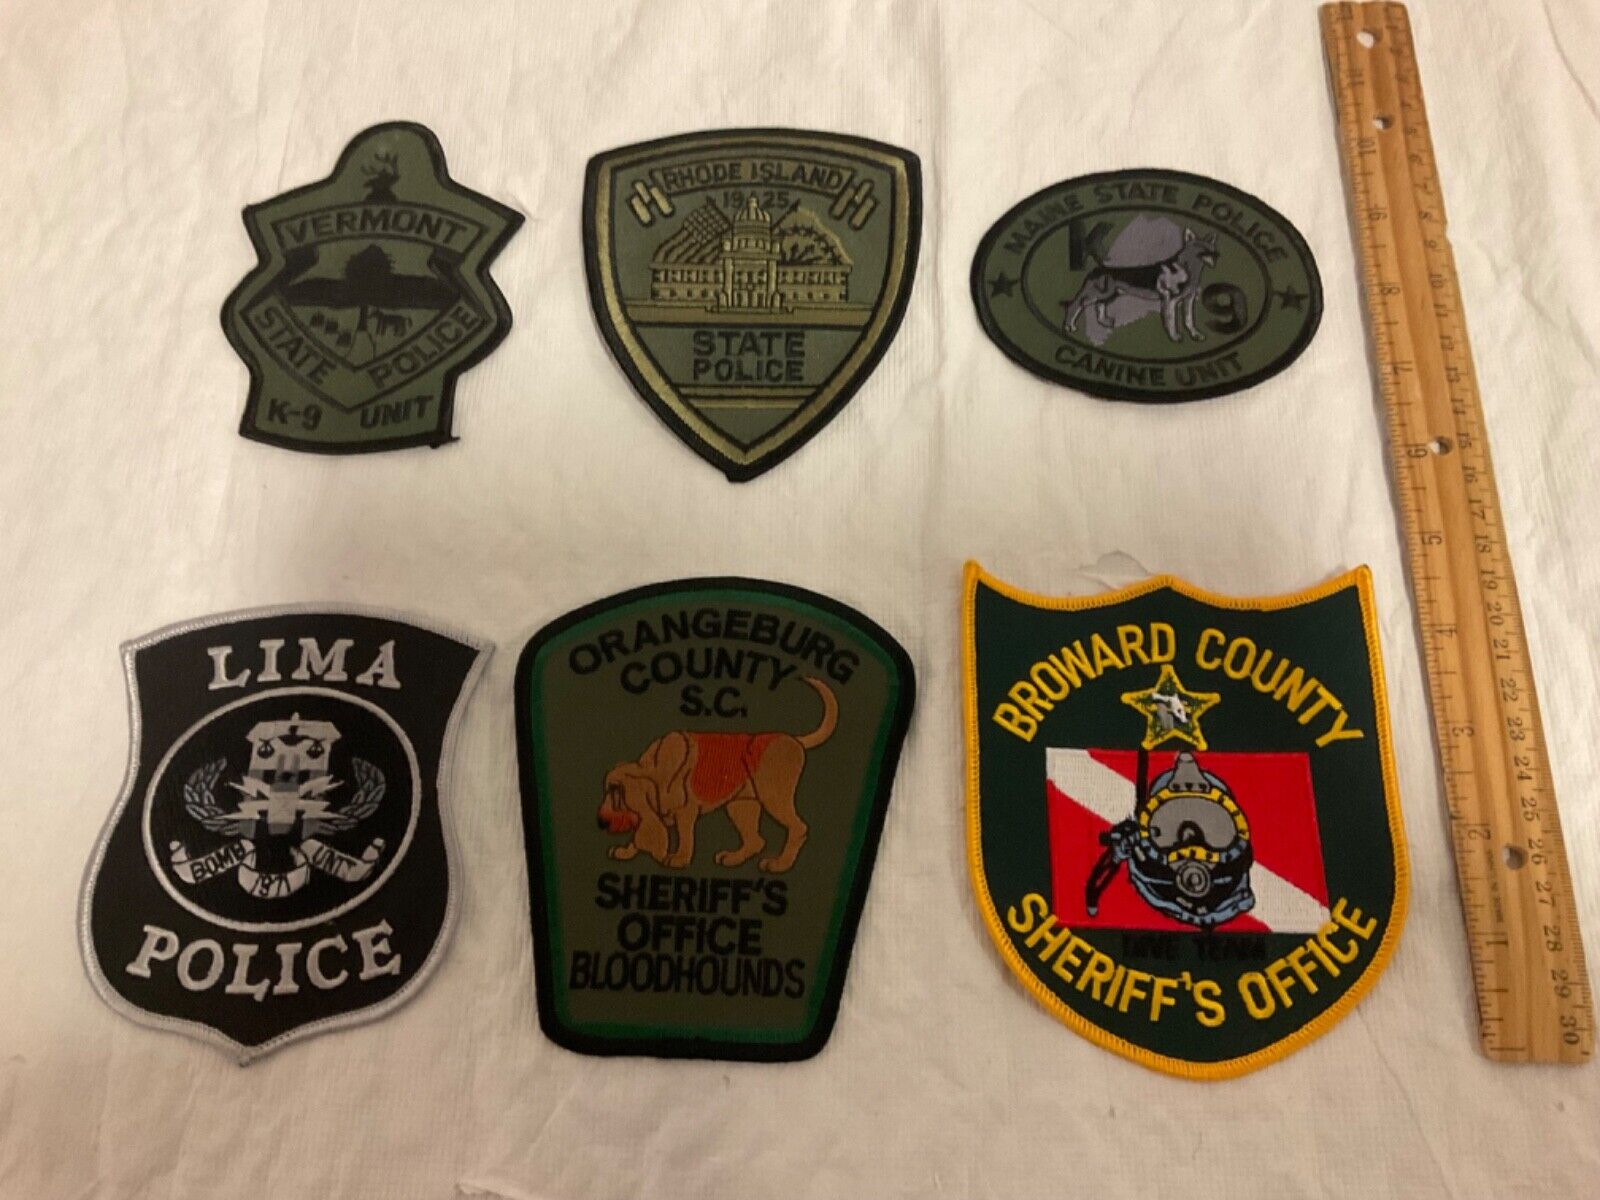 Police ,Sheriff’s  collectors patch set various states 6 pieces full size new